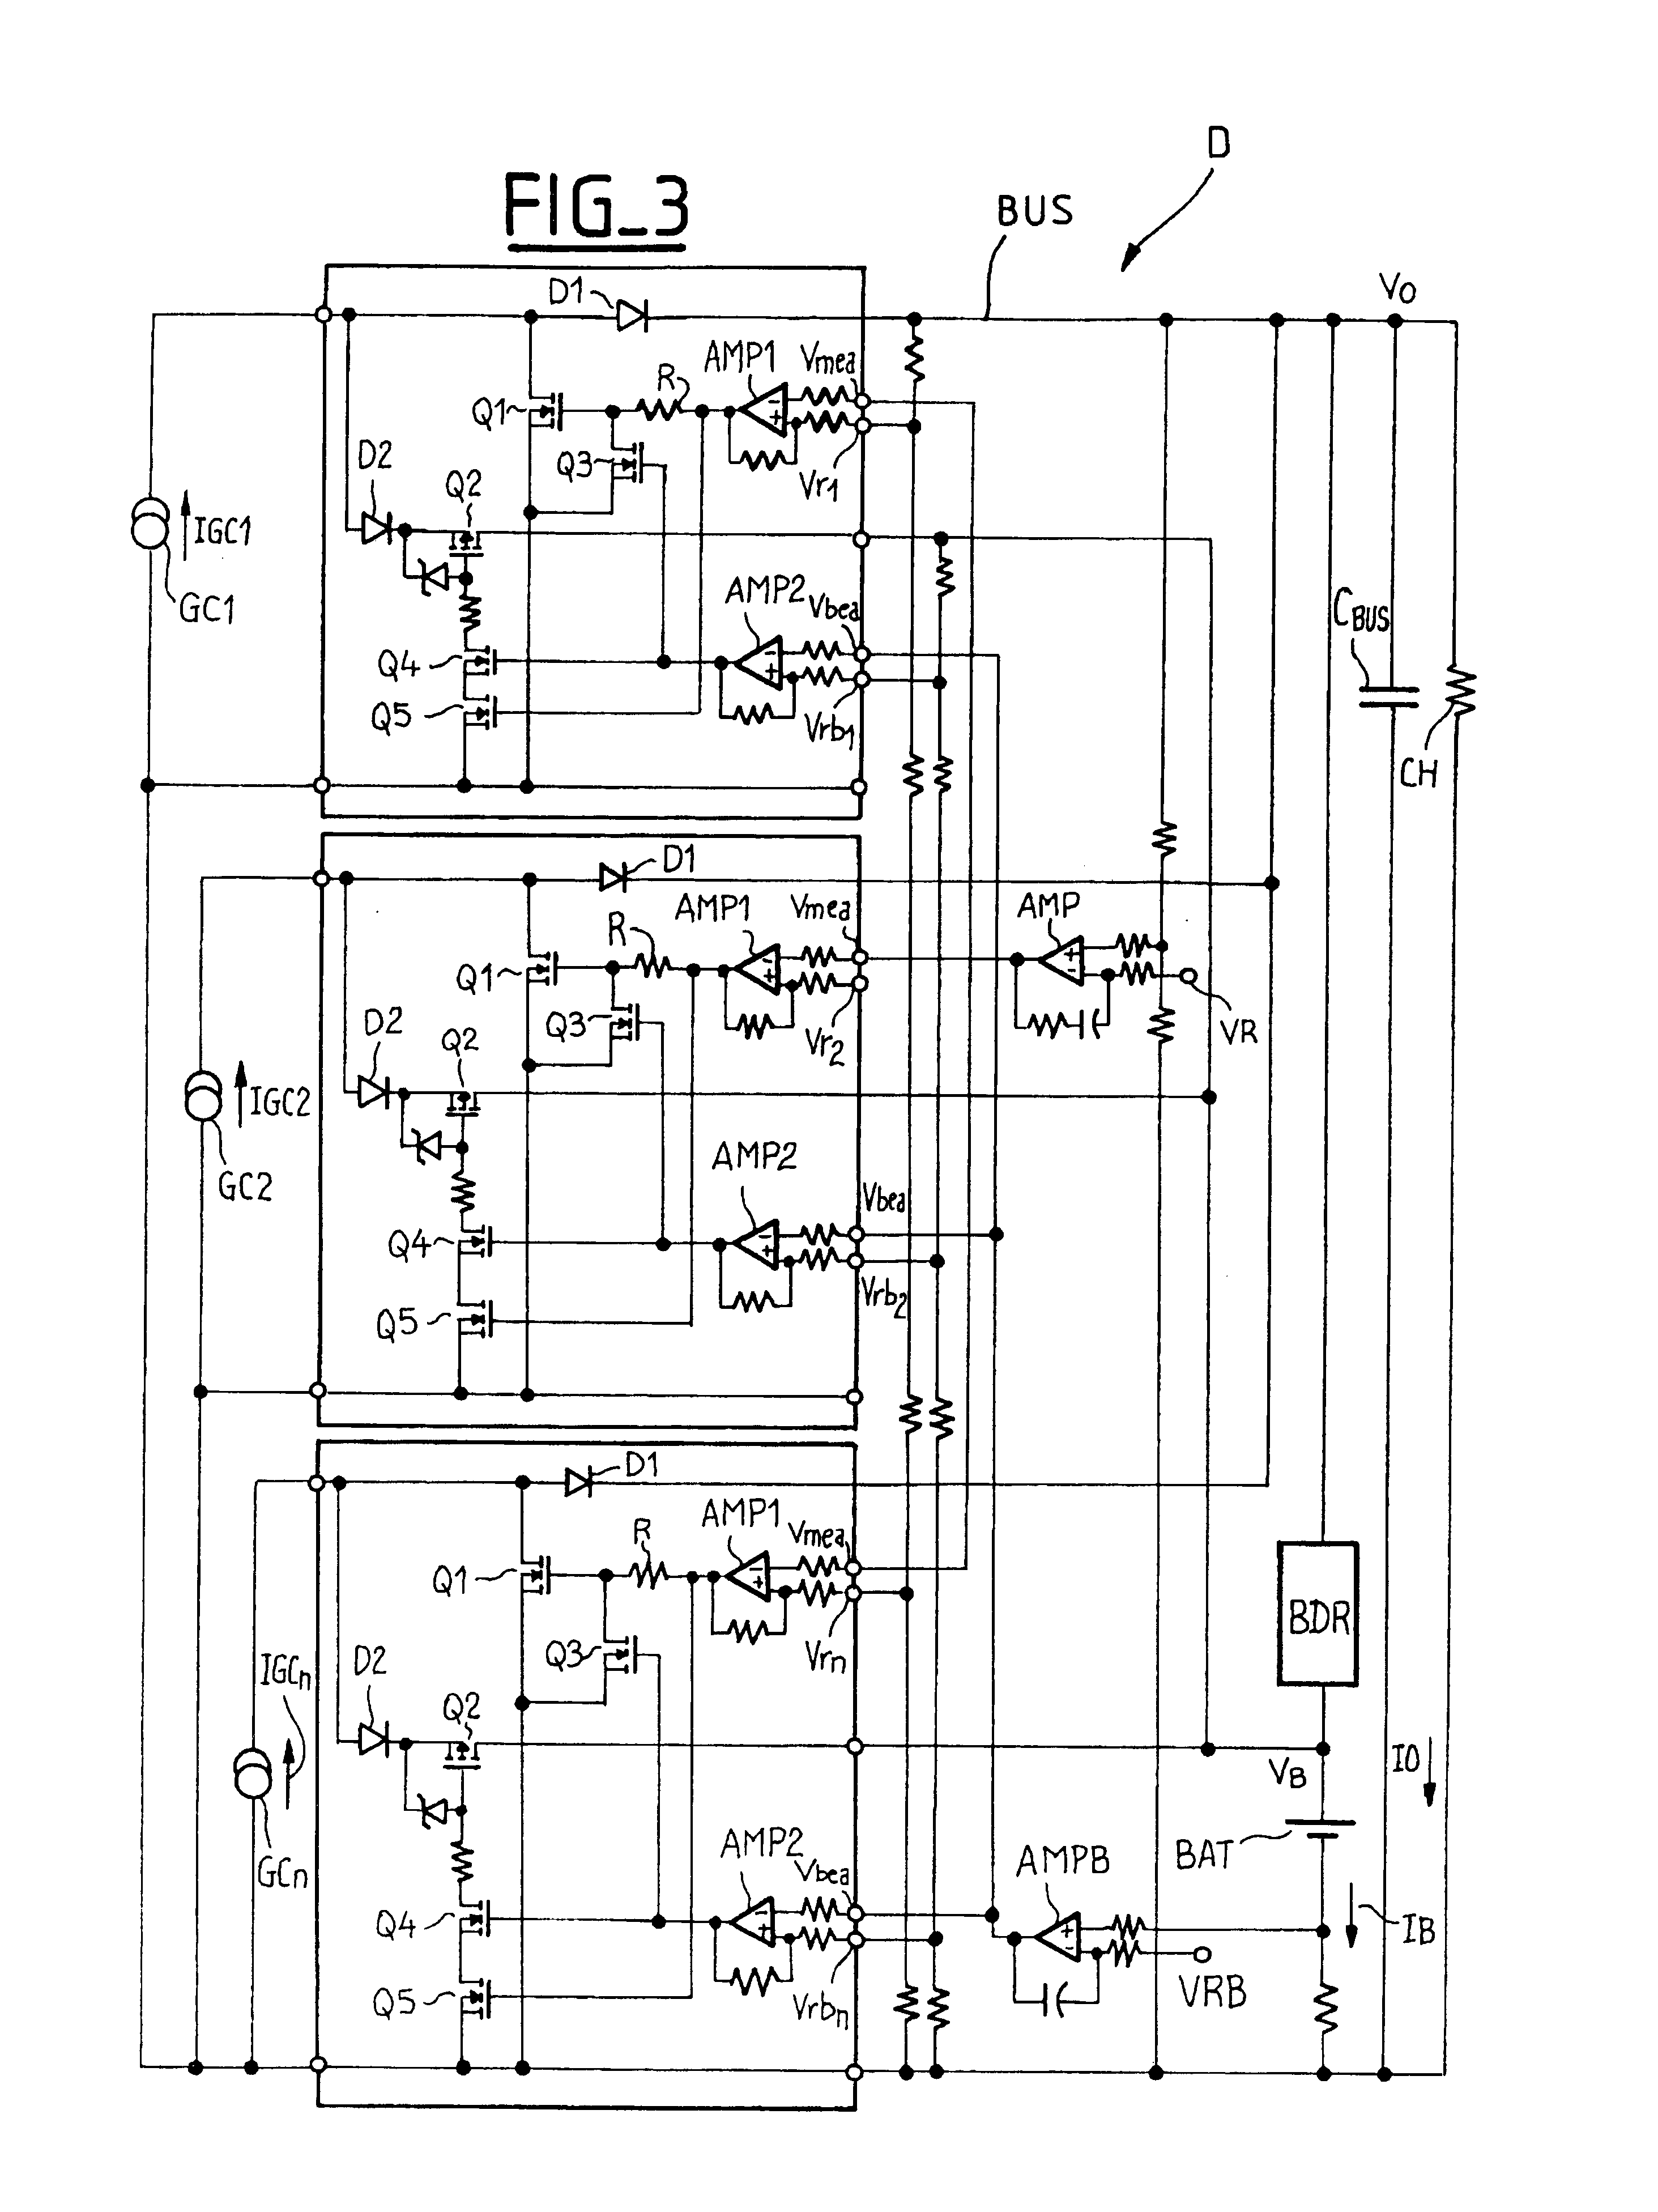 Energy regulation system for an electrical power supply bus